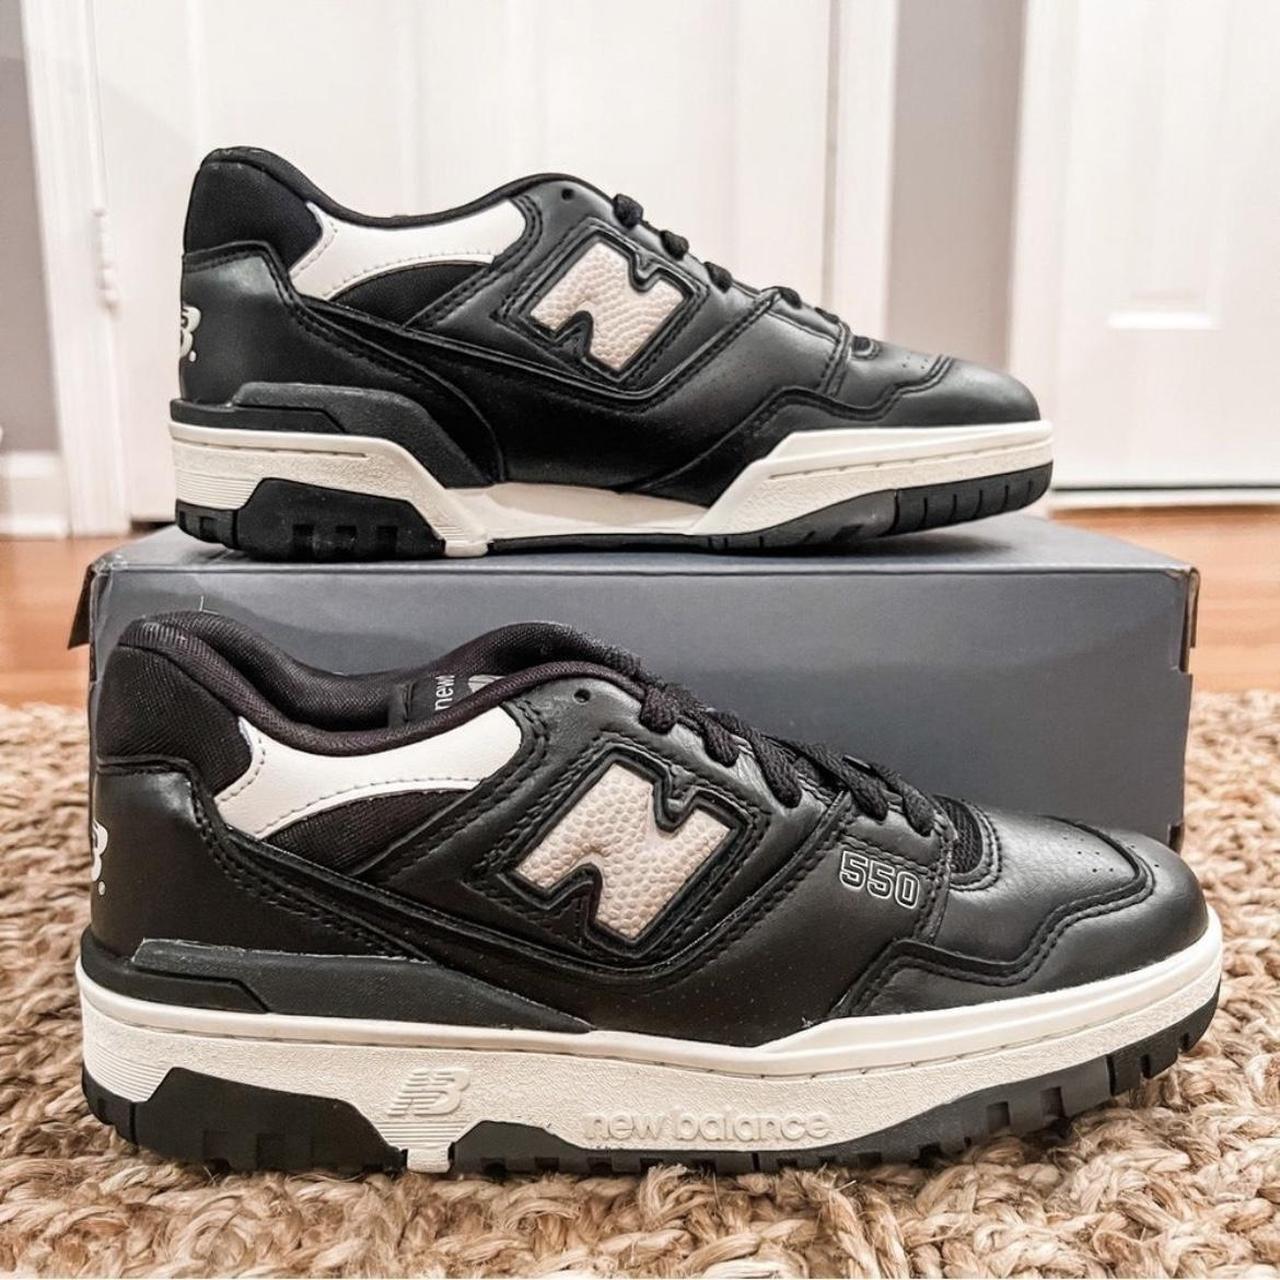 New Balance Women's Black and White Trainers (2)